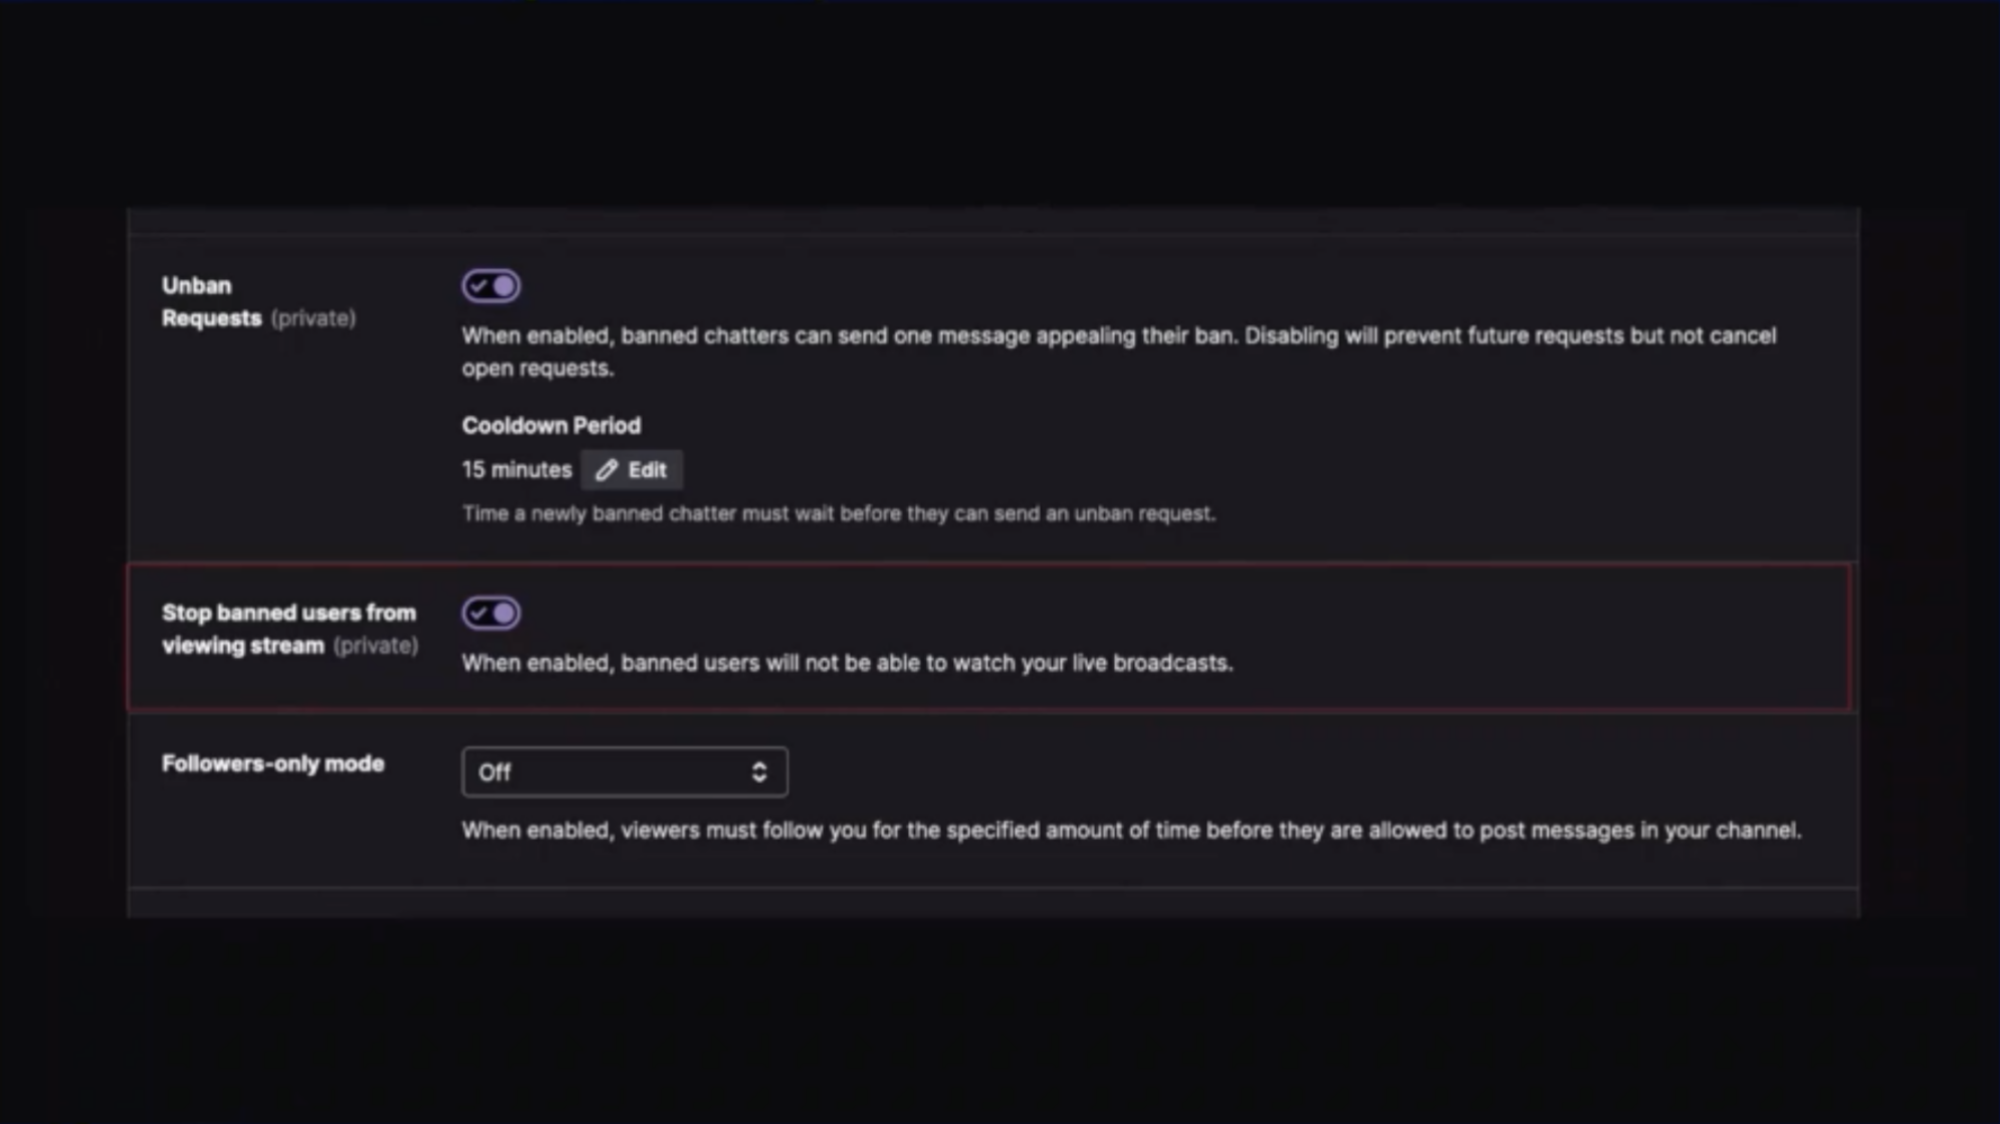 A screenshot of Twitch's dashboard showing the toggle that will enable users to block banned viewers from seeing their stream.